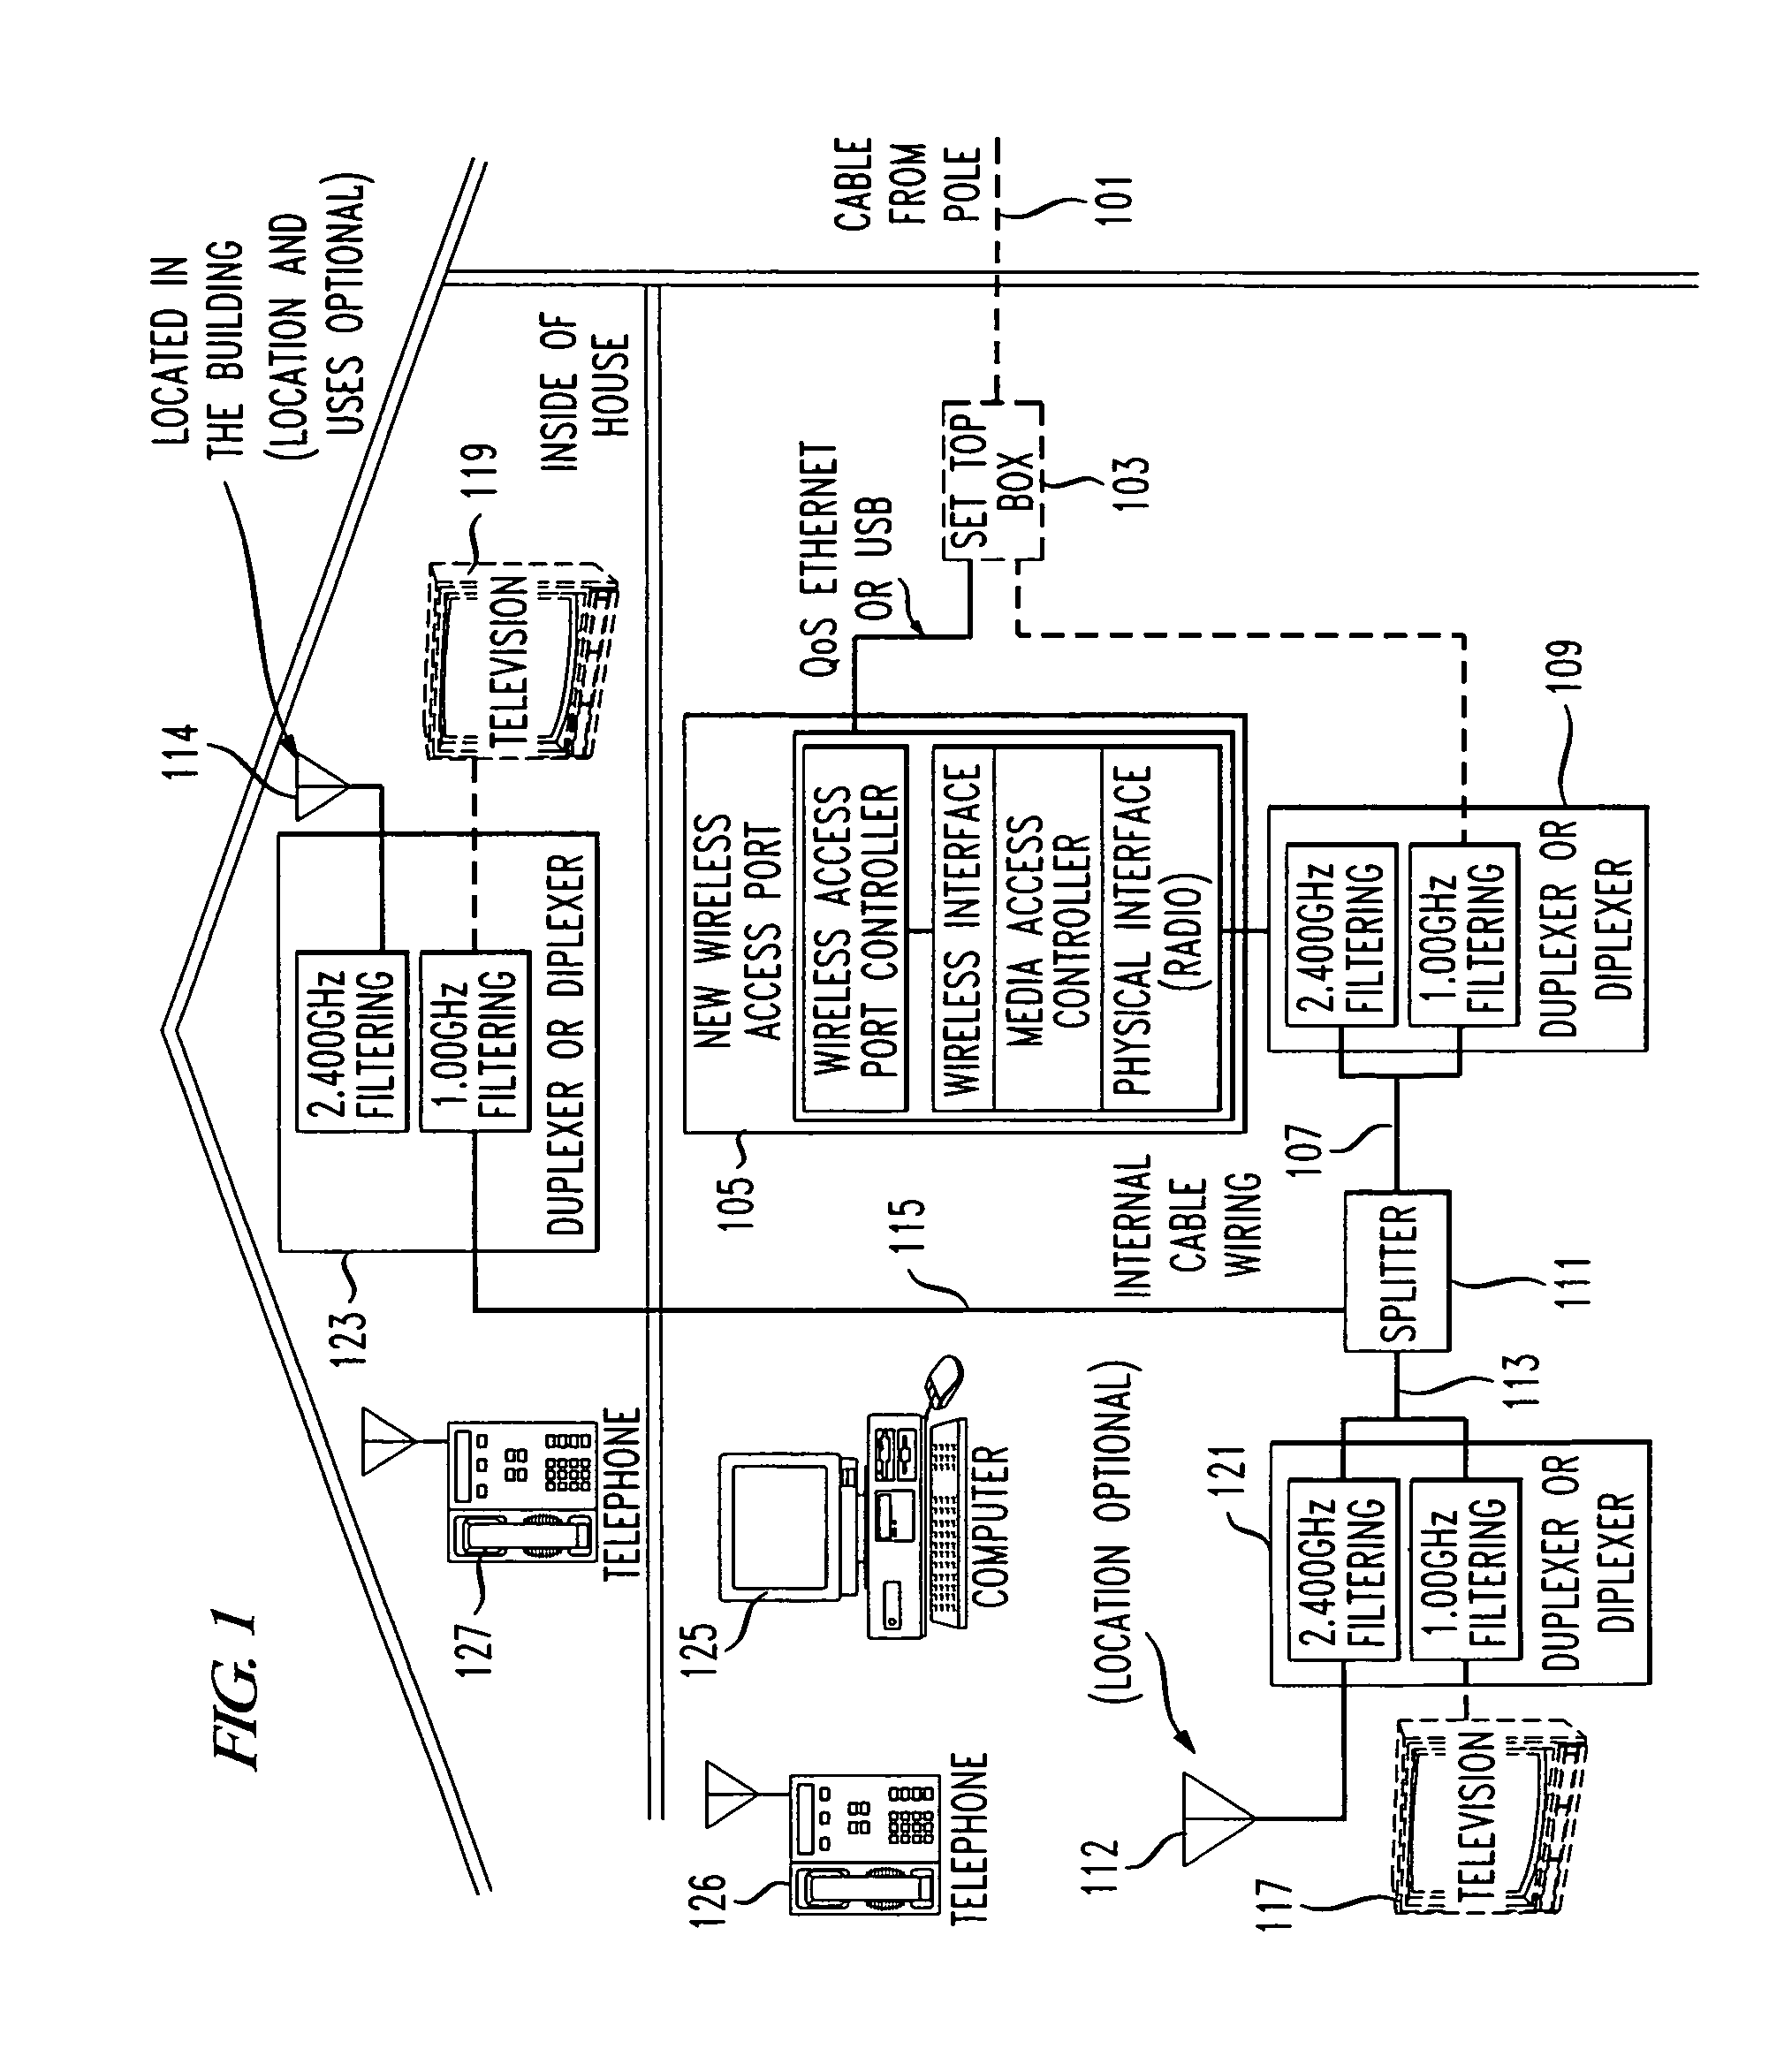 Intra-premises wireless broadband service using lumped and distributed wireless radiation from cable source input